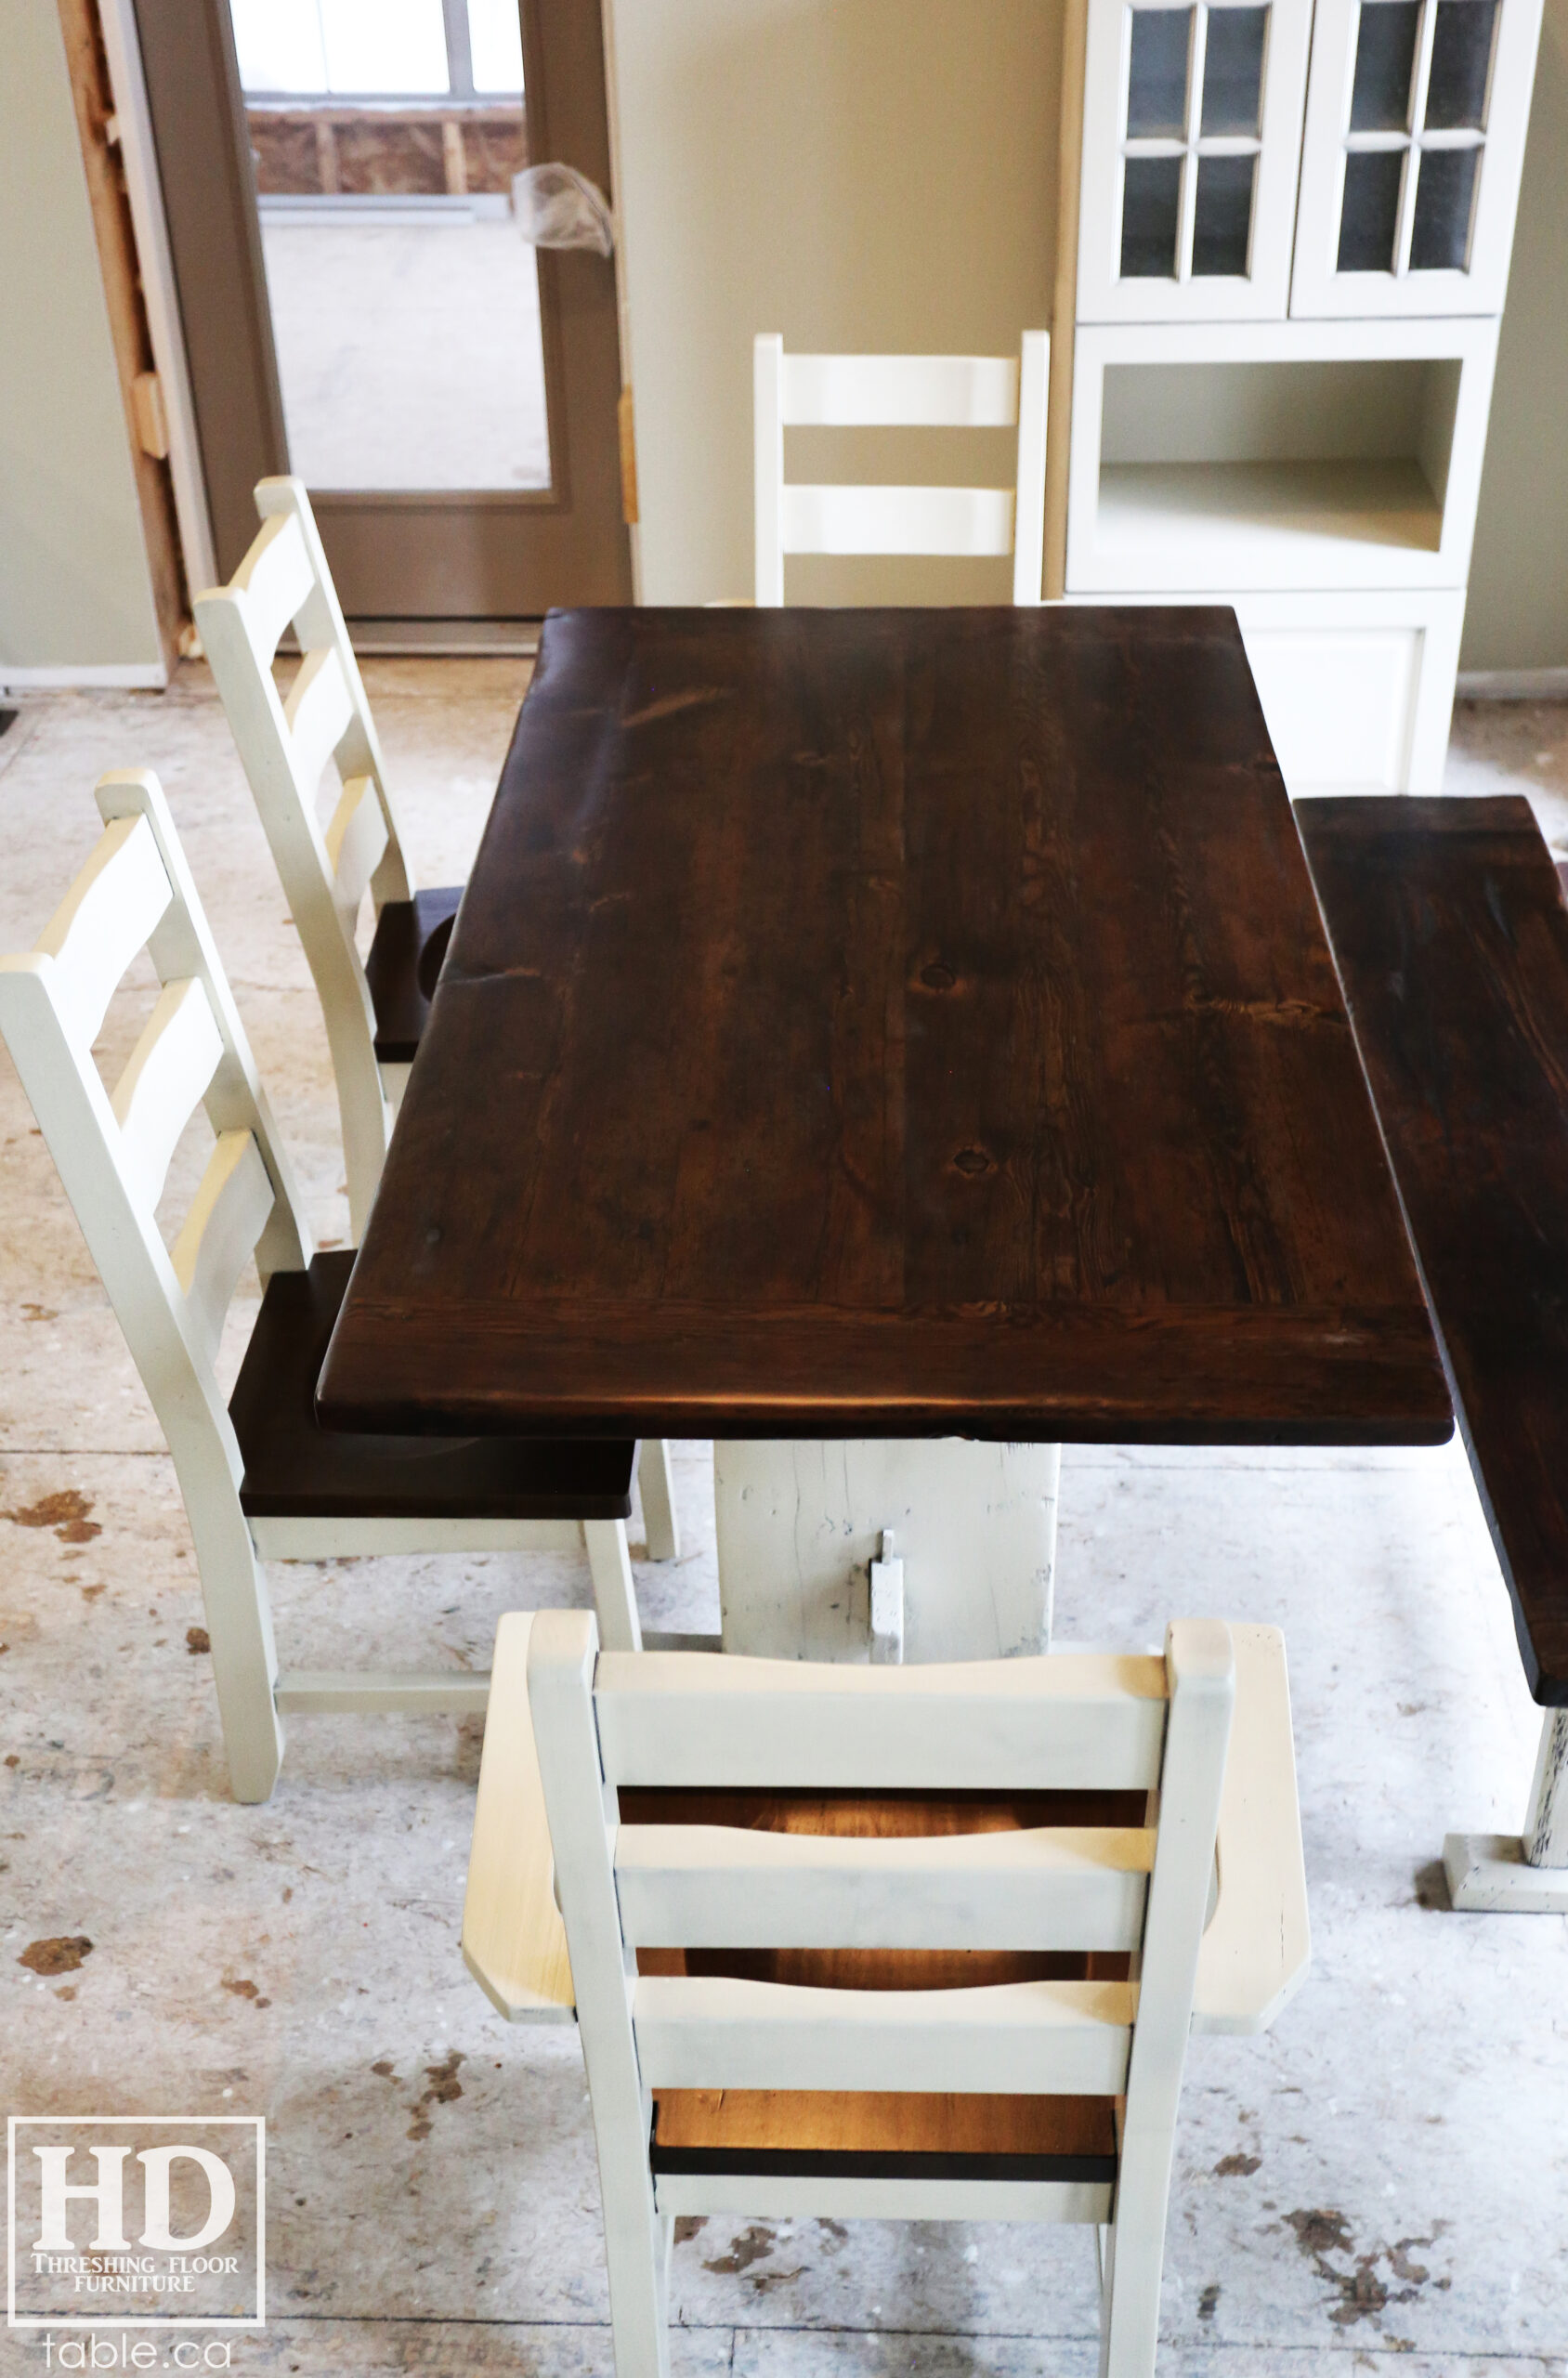 Reclaimed Wood Table & Bench with Black Stain Treatment Option & Custom Finished Base & Ladder Back Chairs by HD Threshing Floor Furniture / www.table.ca